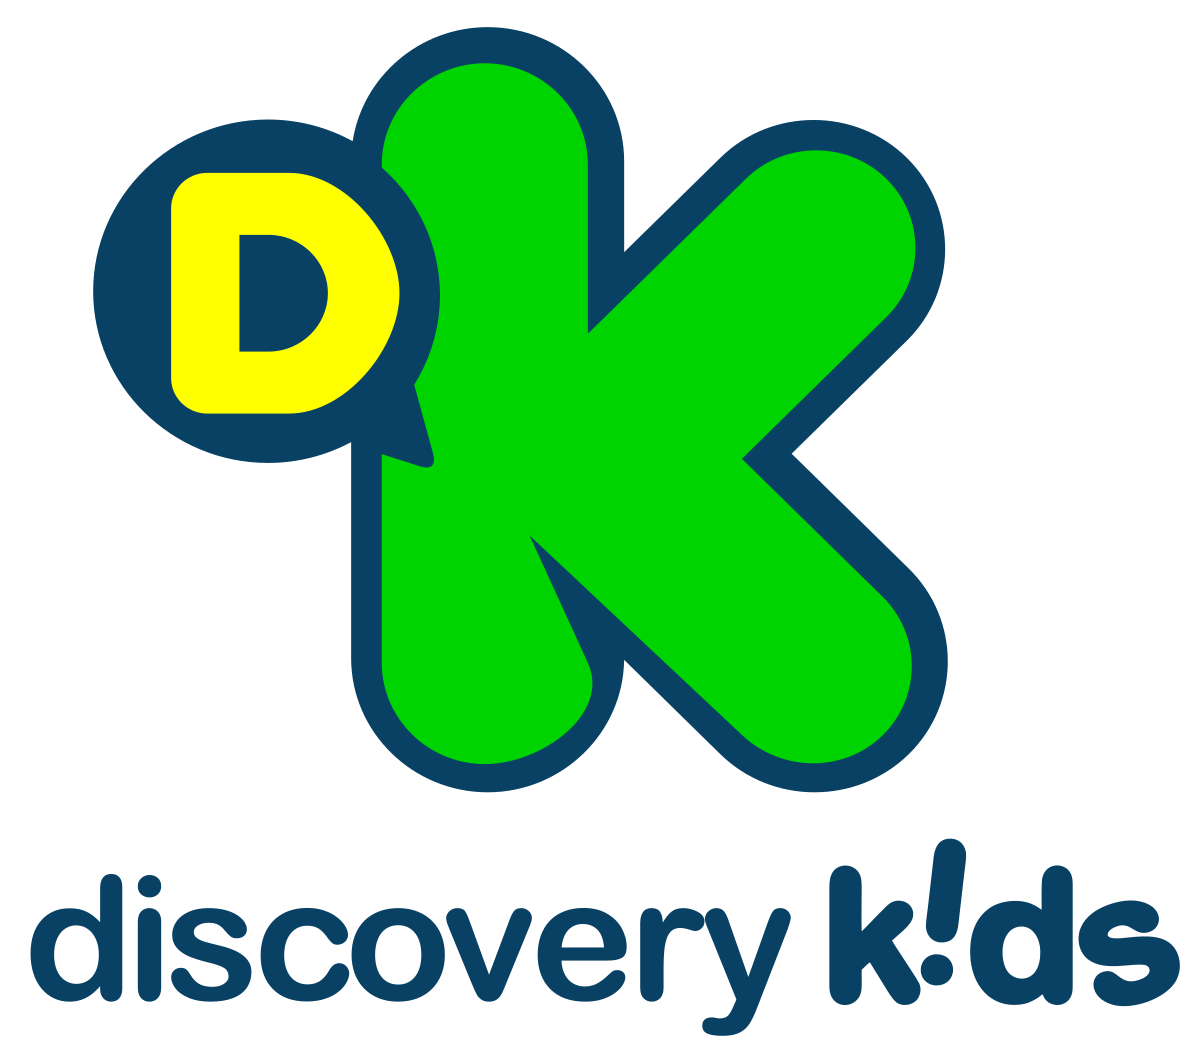 Discovery Kids (Indian TV channel) - Wikipedia